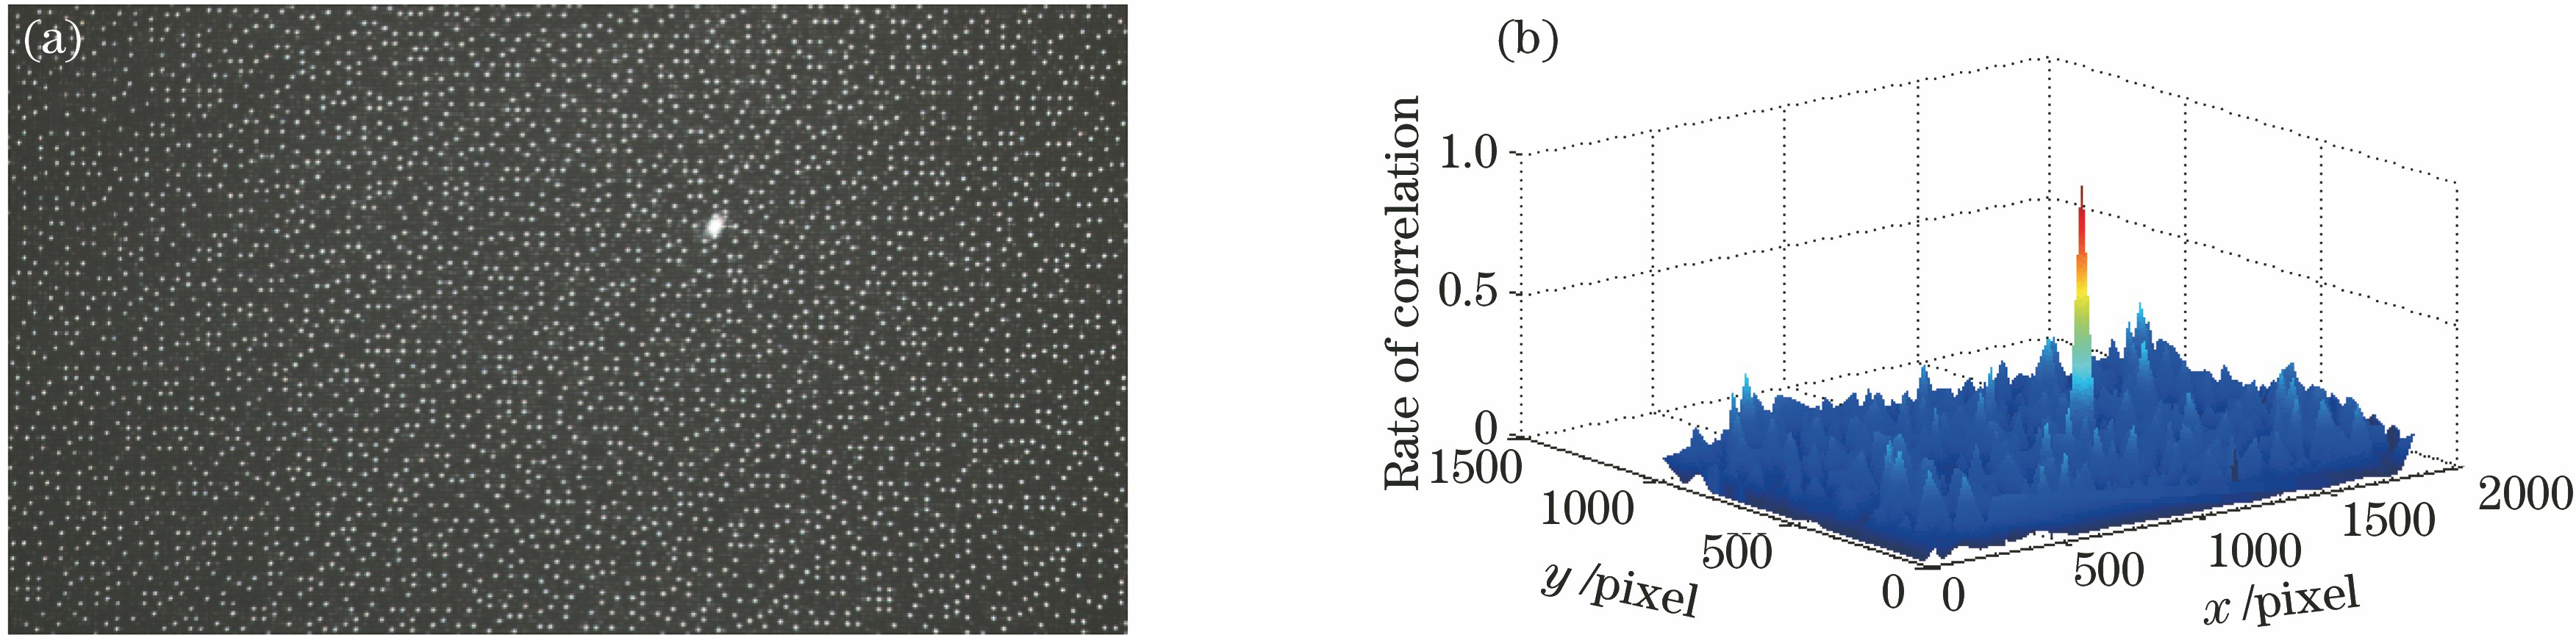 Speckle correlation. (a) Speckle image; (b) correlation between single speckle and total speckles